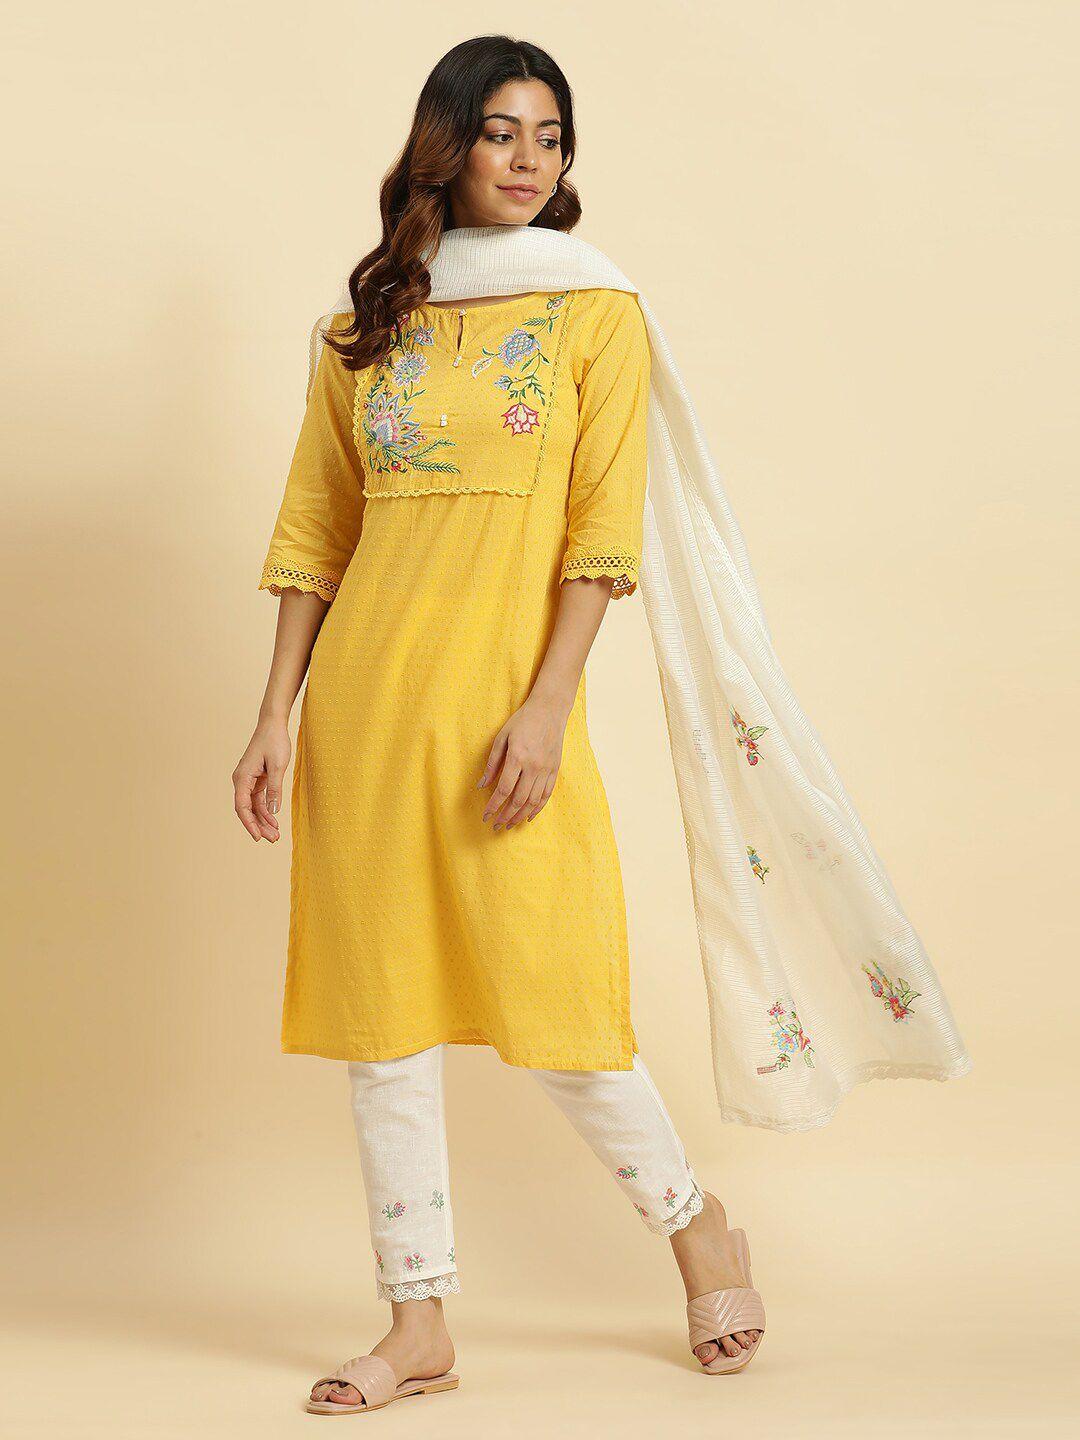 w floral embroidered dupatta